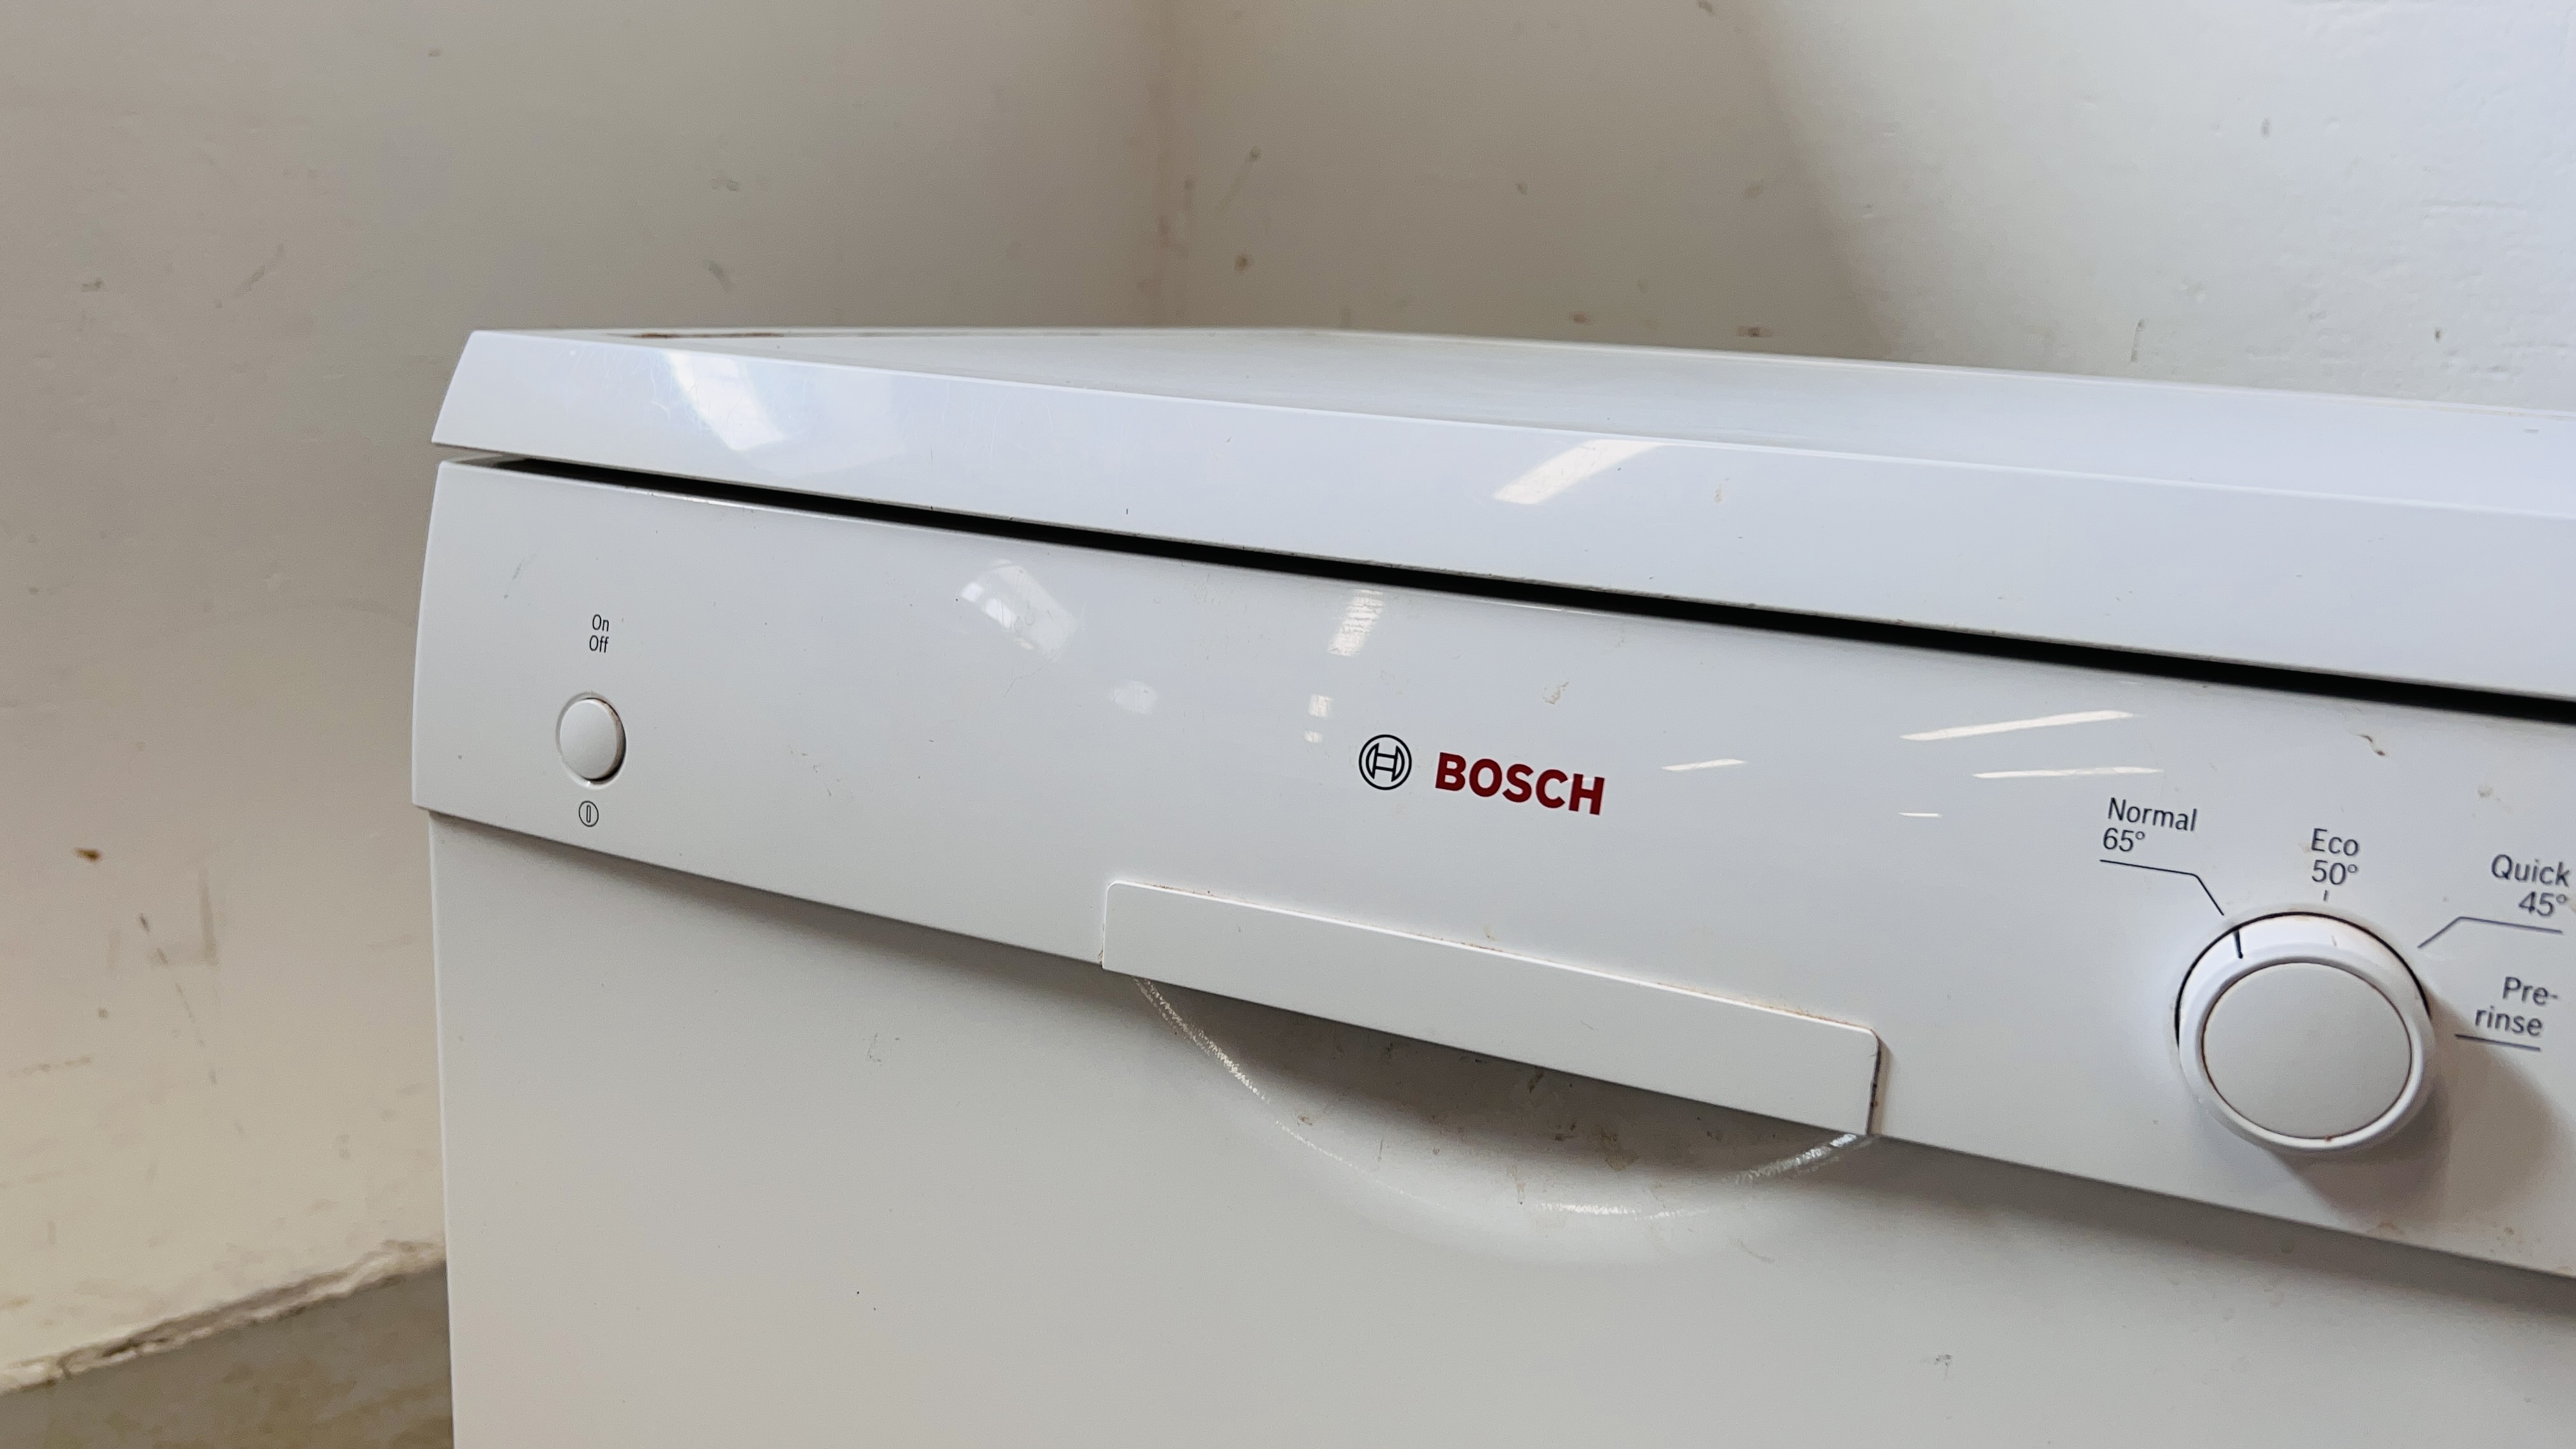 A BOSCH DISHWASHER - SOLD AS SEEN. - Image 3 of 9